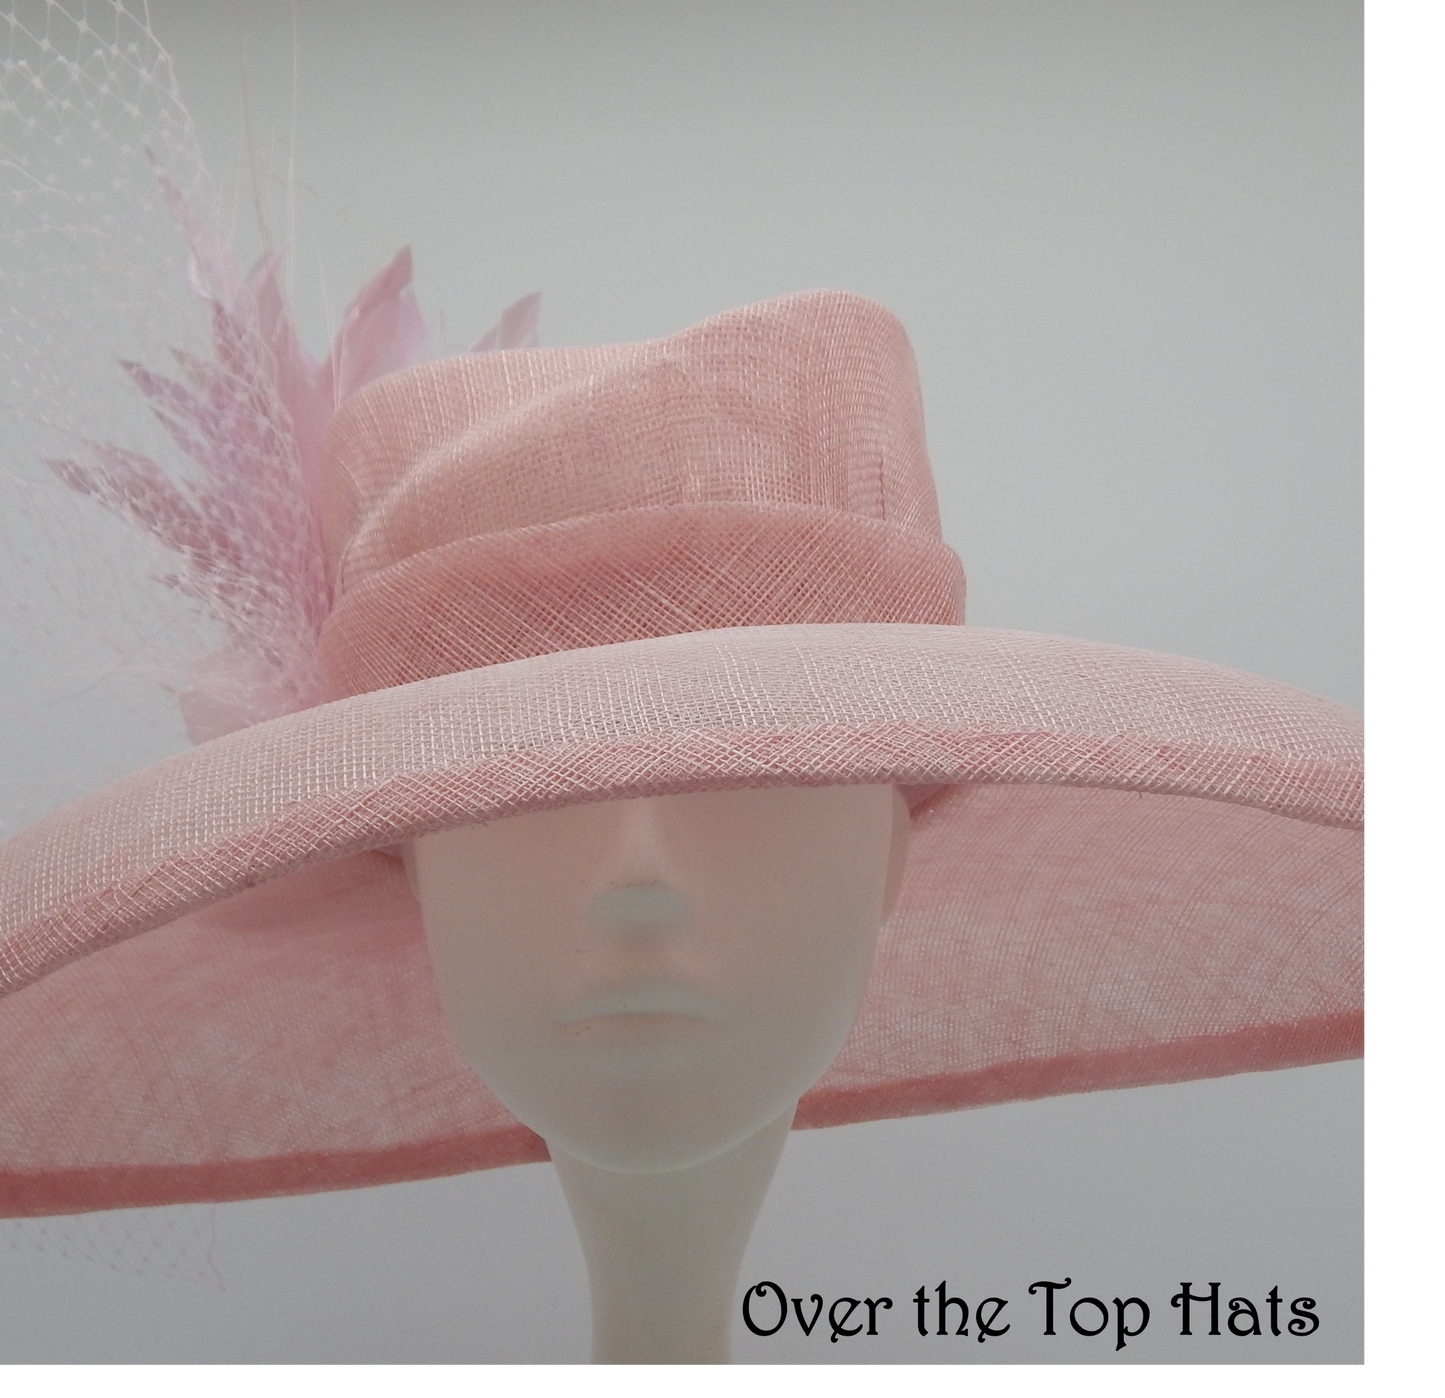 Stunning Pink Big Brimmed Sinamay Hat, Great for The Derby, Oaks, Steeplechase, Church or Weddings